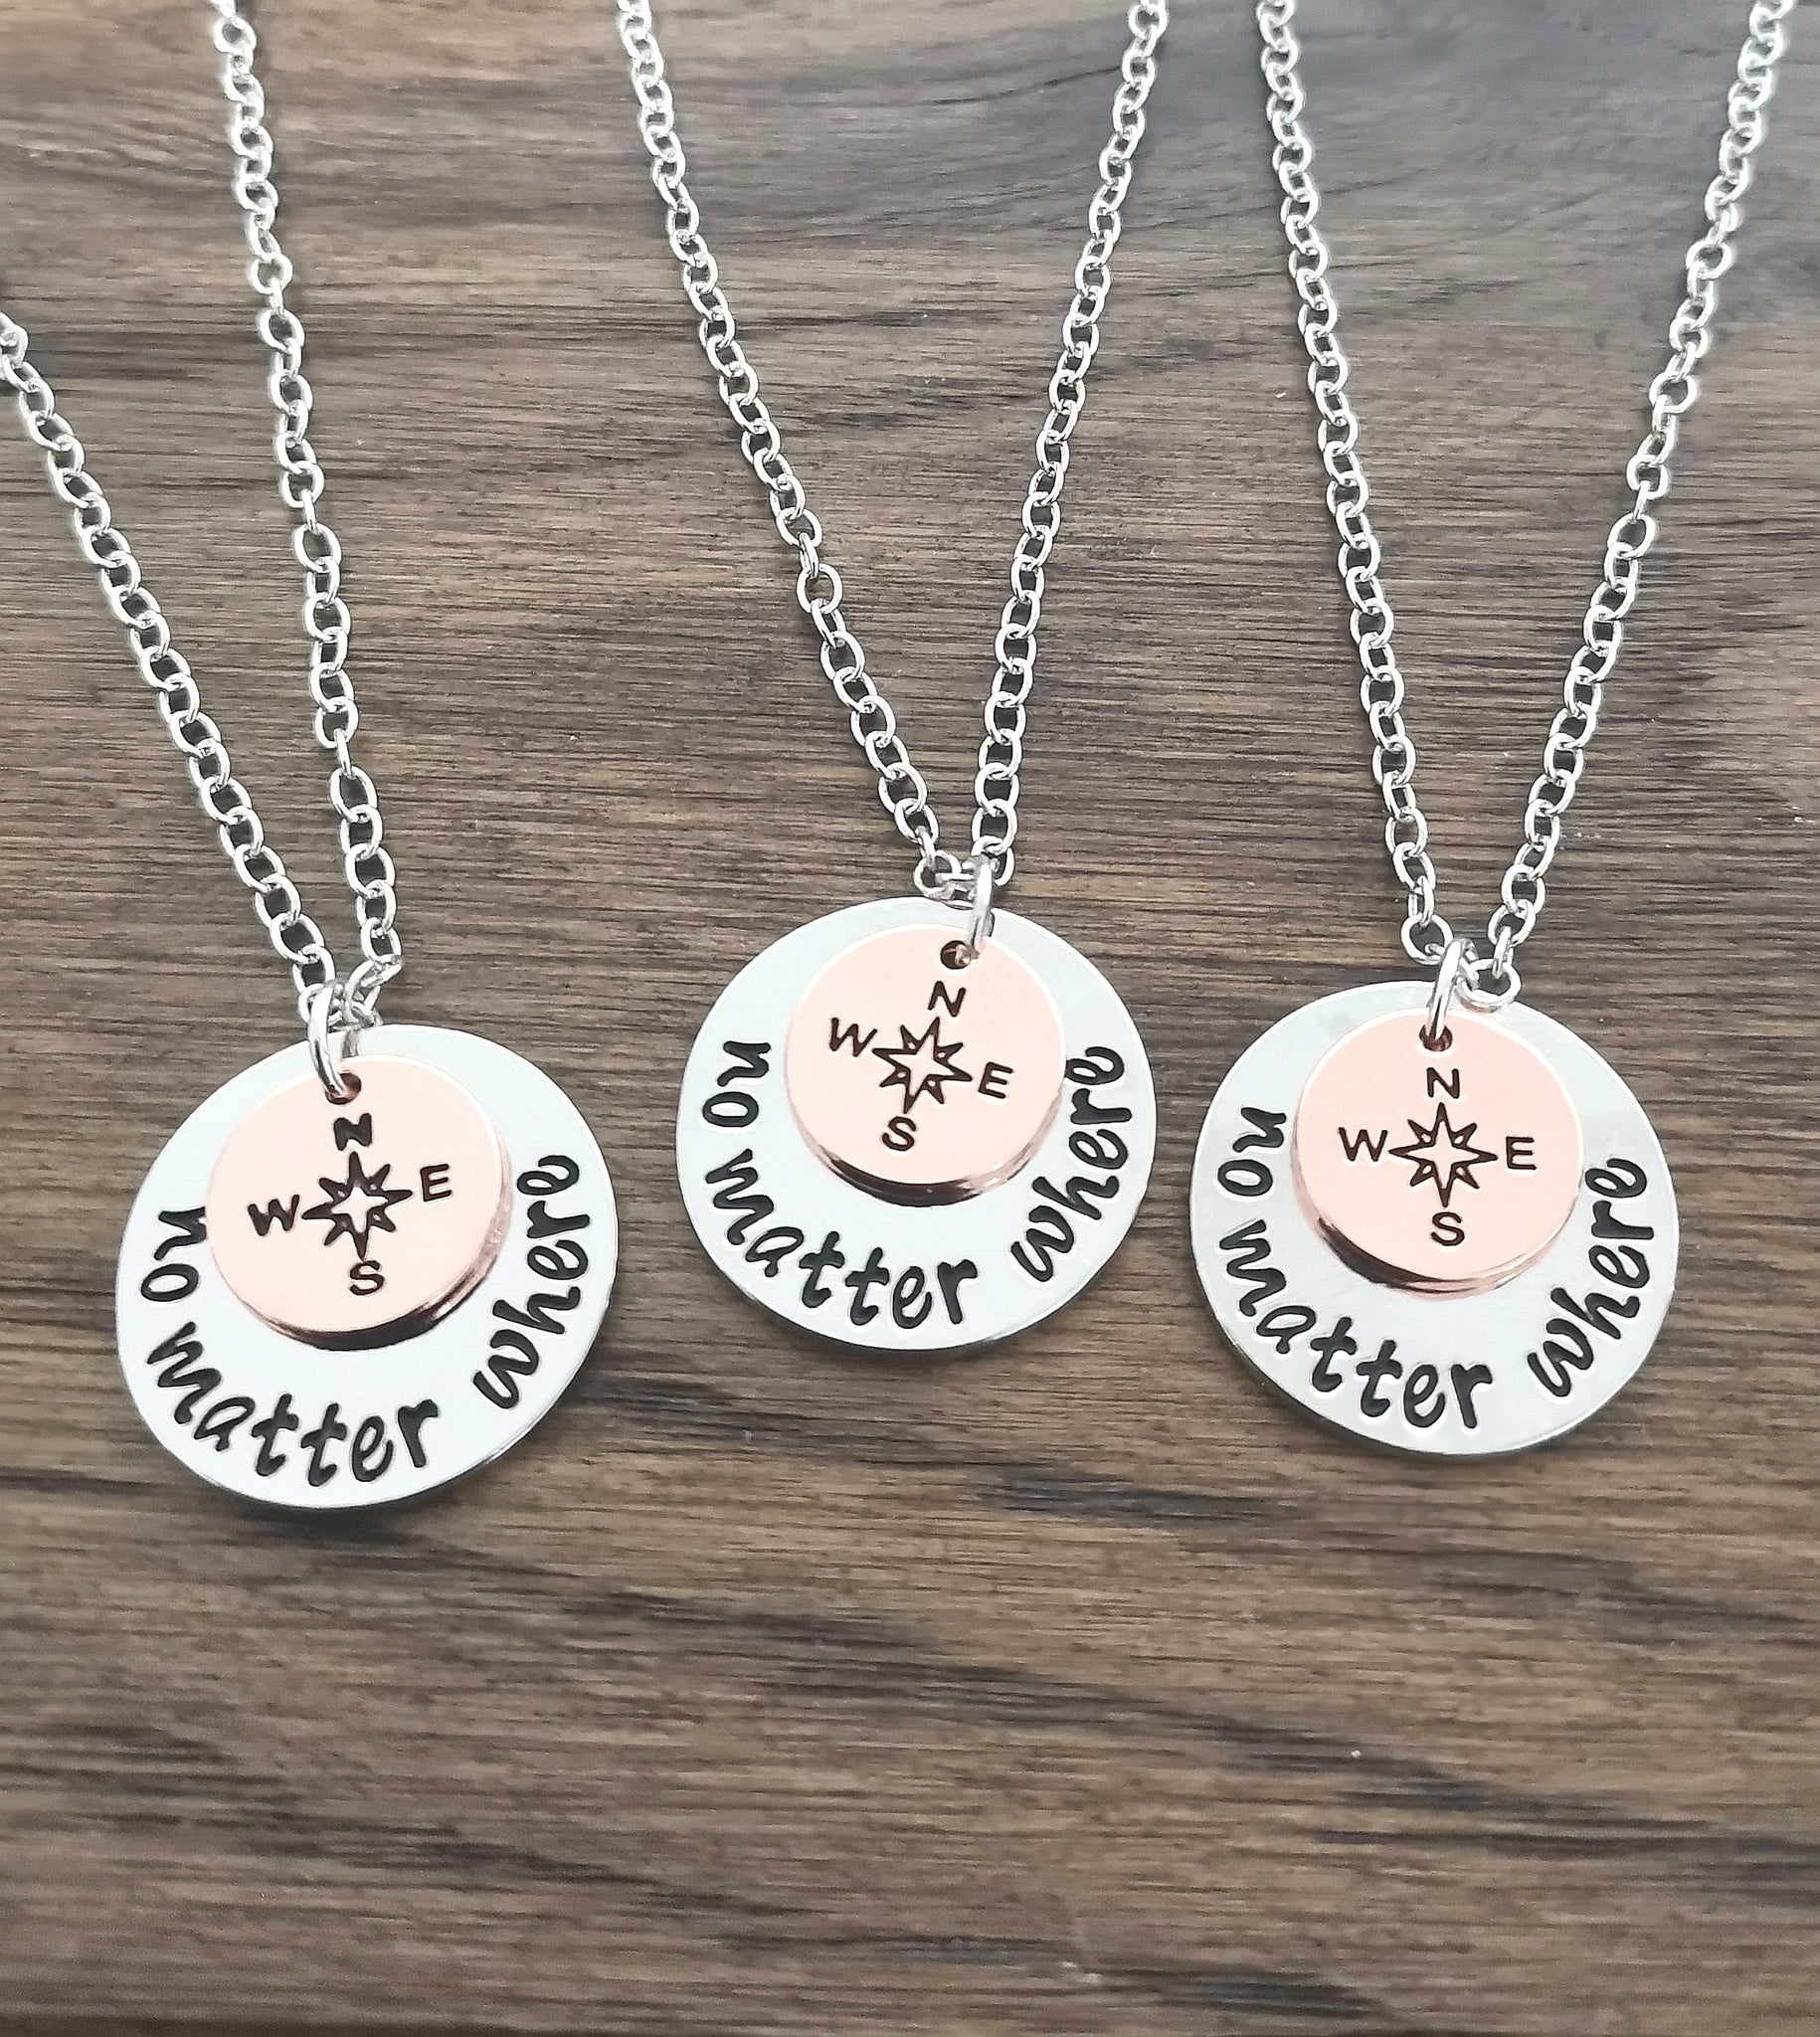 Compass necklace pendant, compass charm, no matter where, bff necklace, sister, mother daughter, friendship jewelry, friends, break up gift